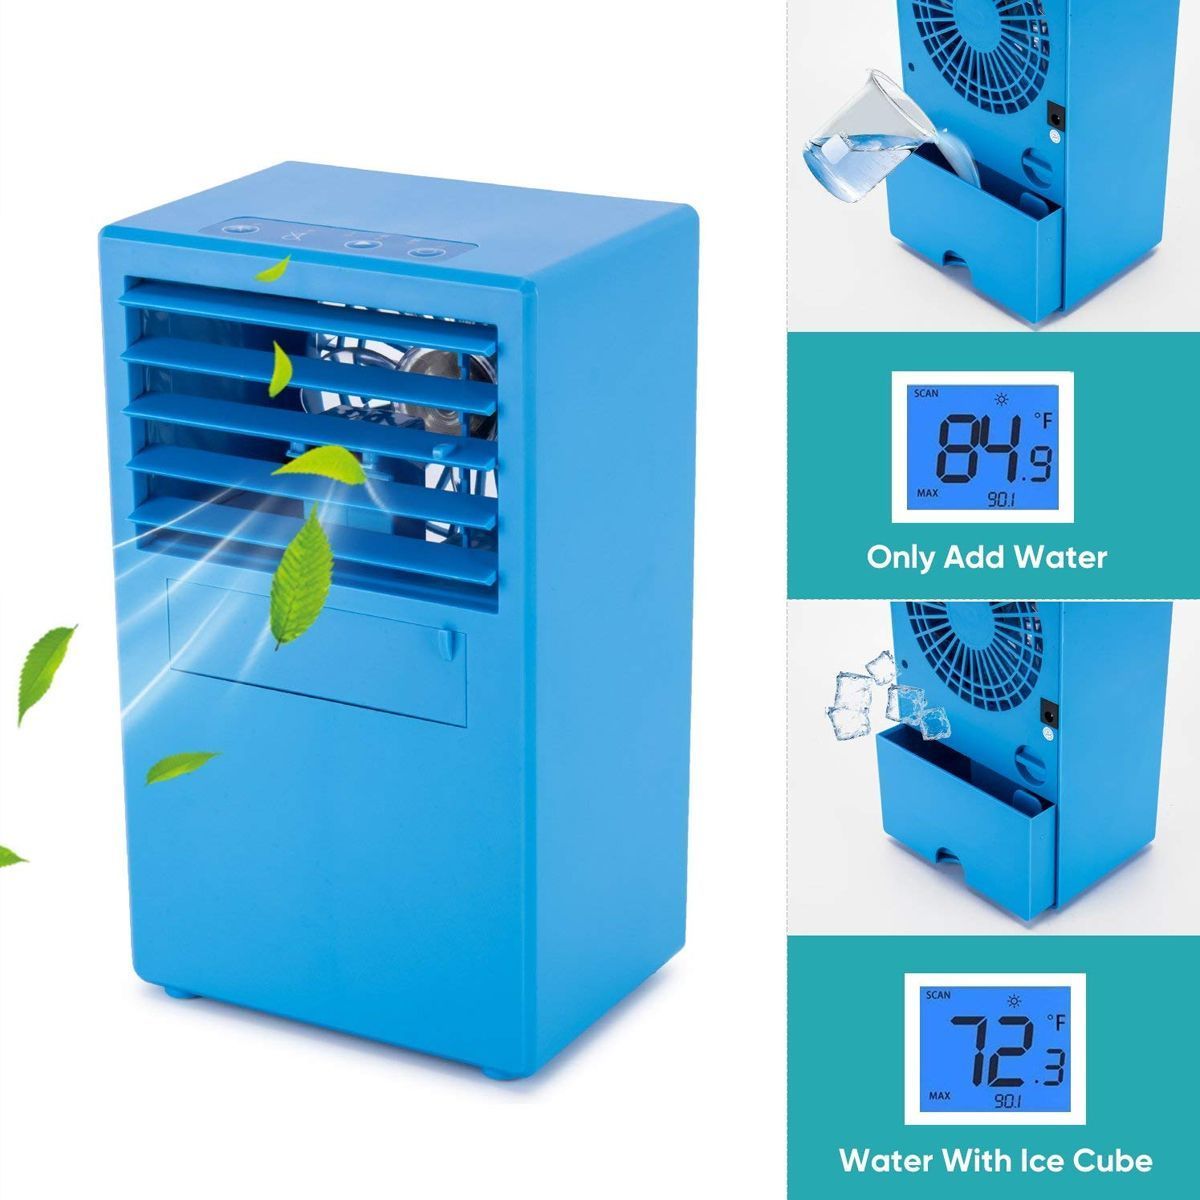 3-Colors-24V-3-File-Speed-5-Leaf-Fan-Spray-Humidification-Mini-Air-Conditioning-1709985